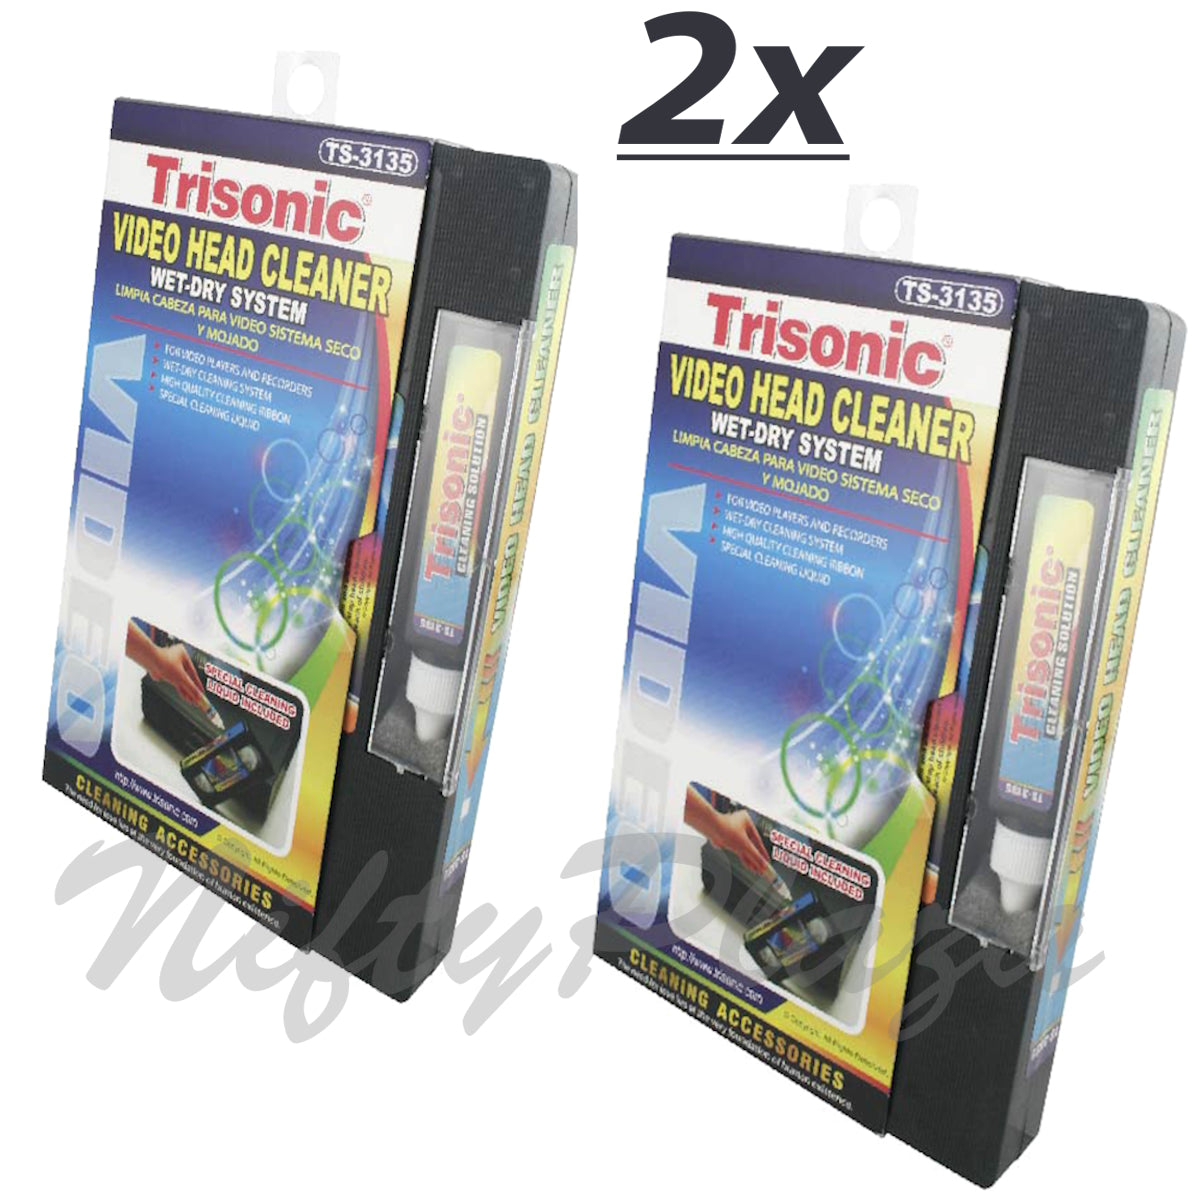 2 Pack - Trisonic Video Head Cleaner, Wet or Dry, Video Players and Recorders, Cleaning Liquid